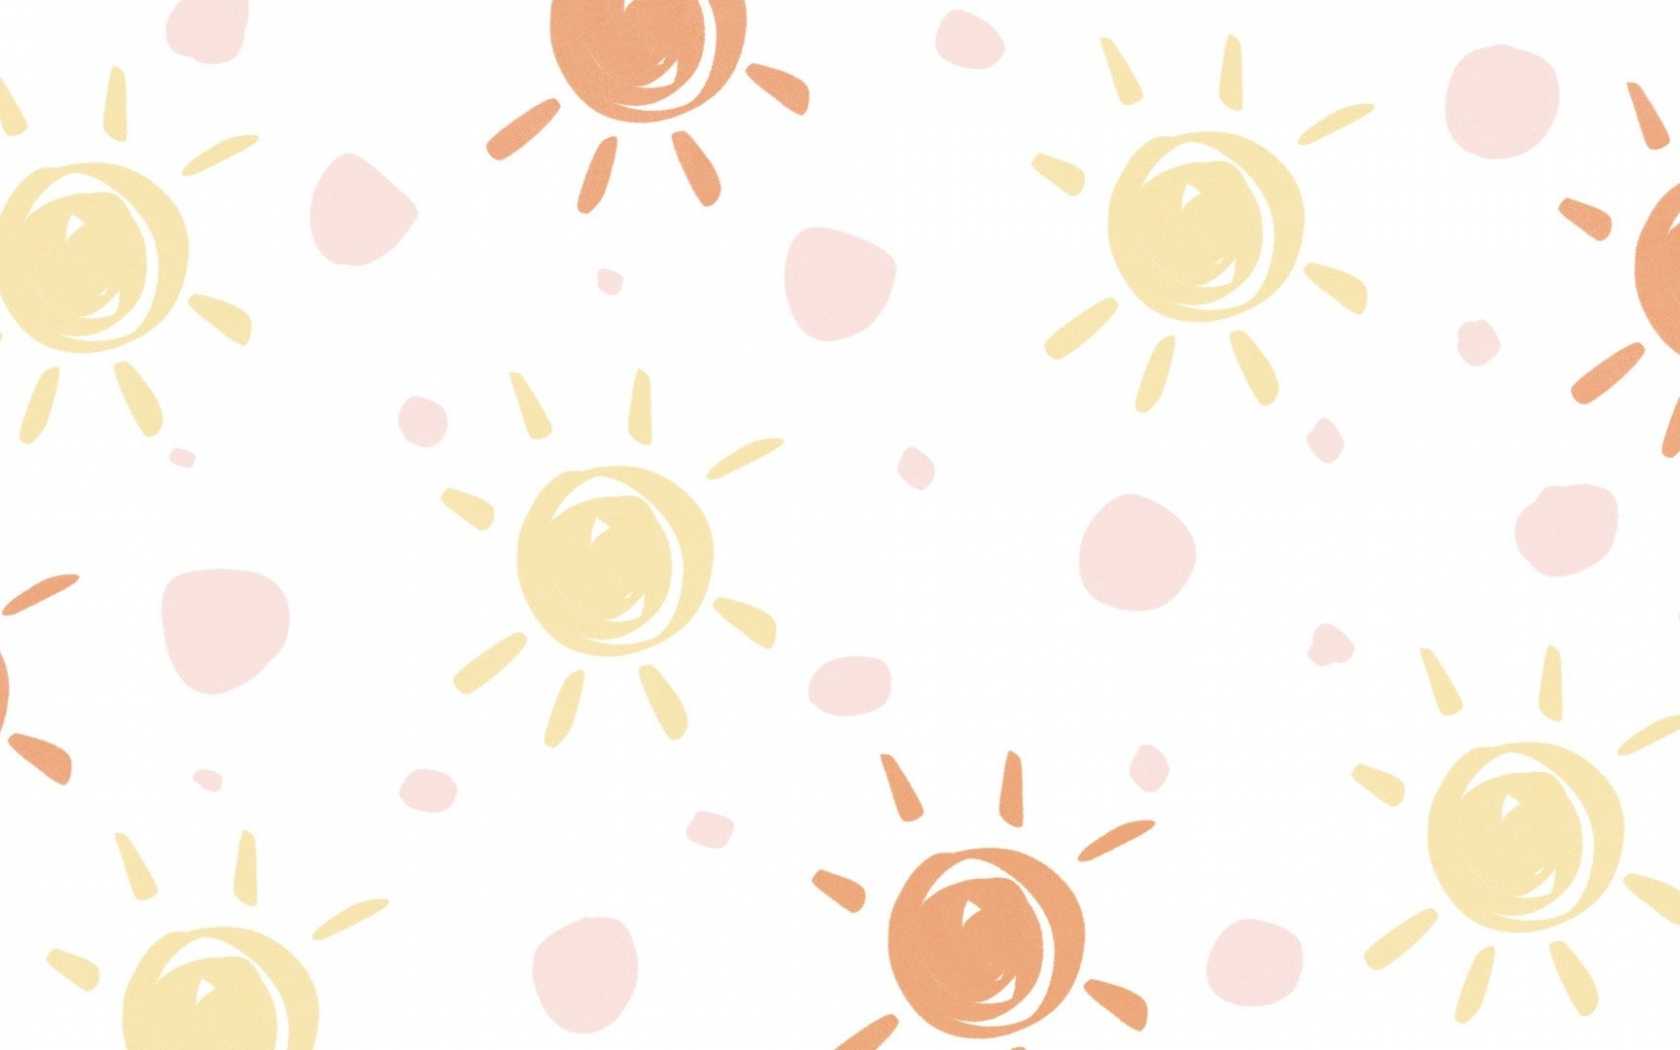 A pattern of pastel suns and dots on a white background - Boho